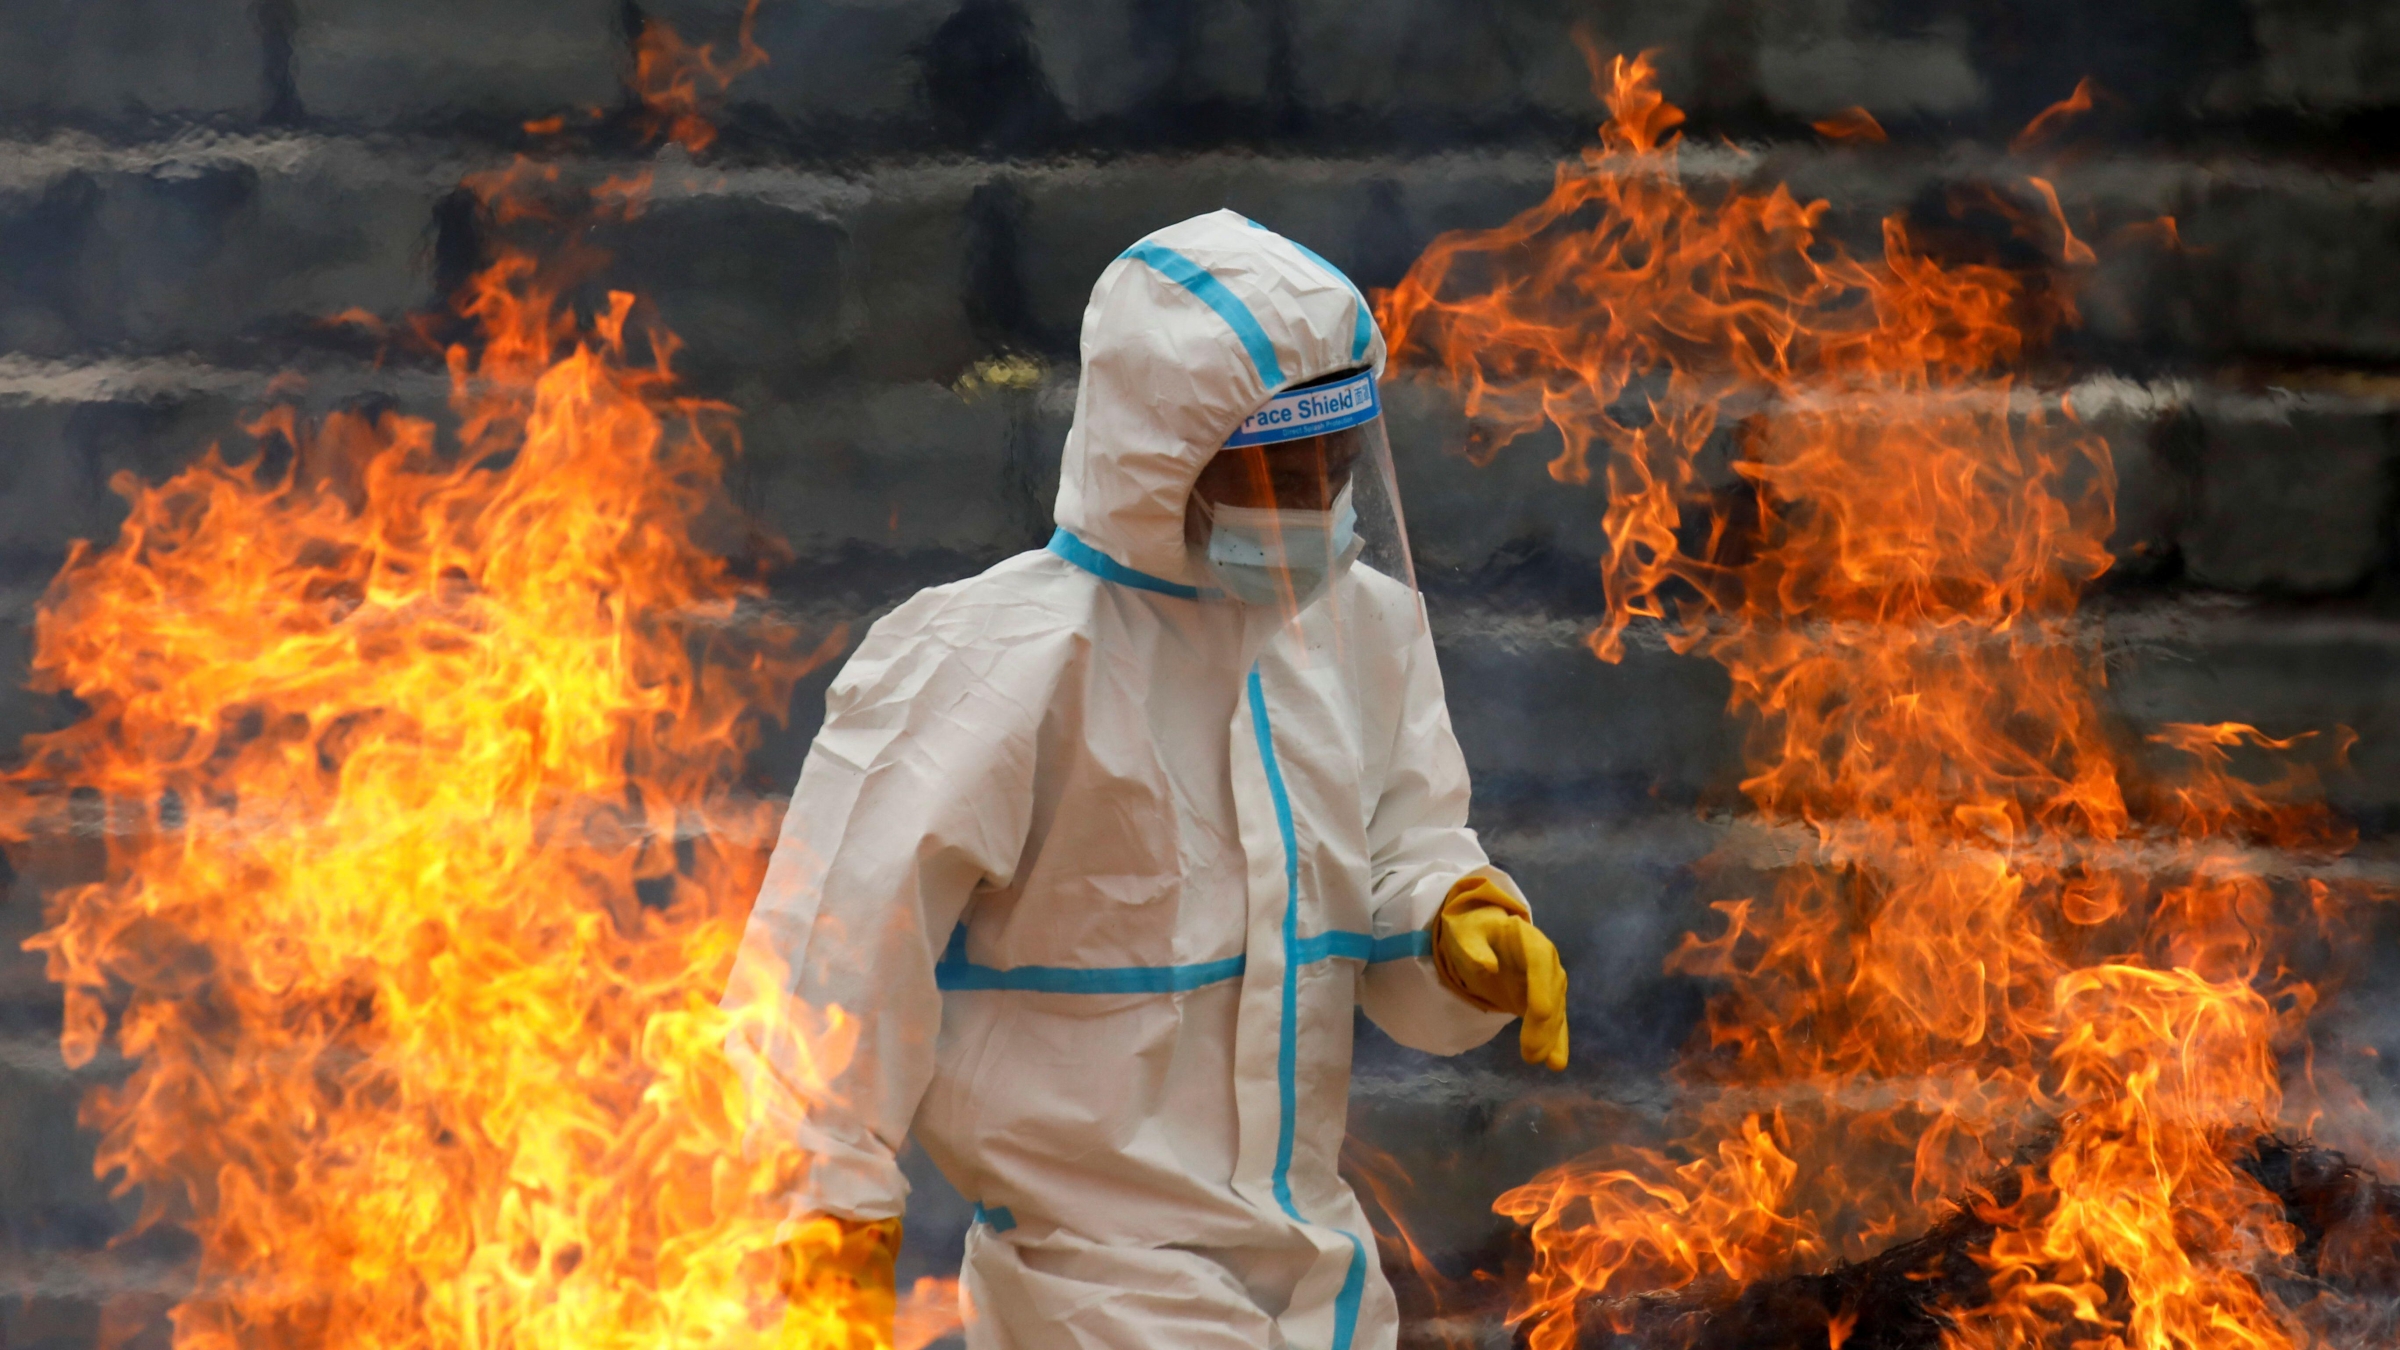 A man wearing personal protective equipment helps cremate the bodies of COVID-19 victims.